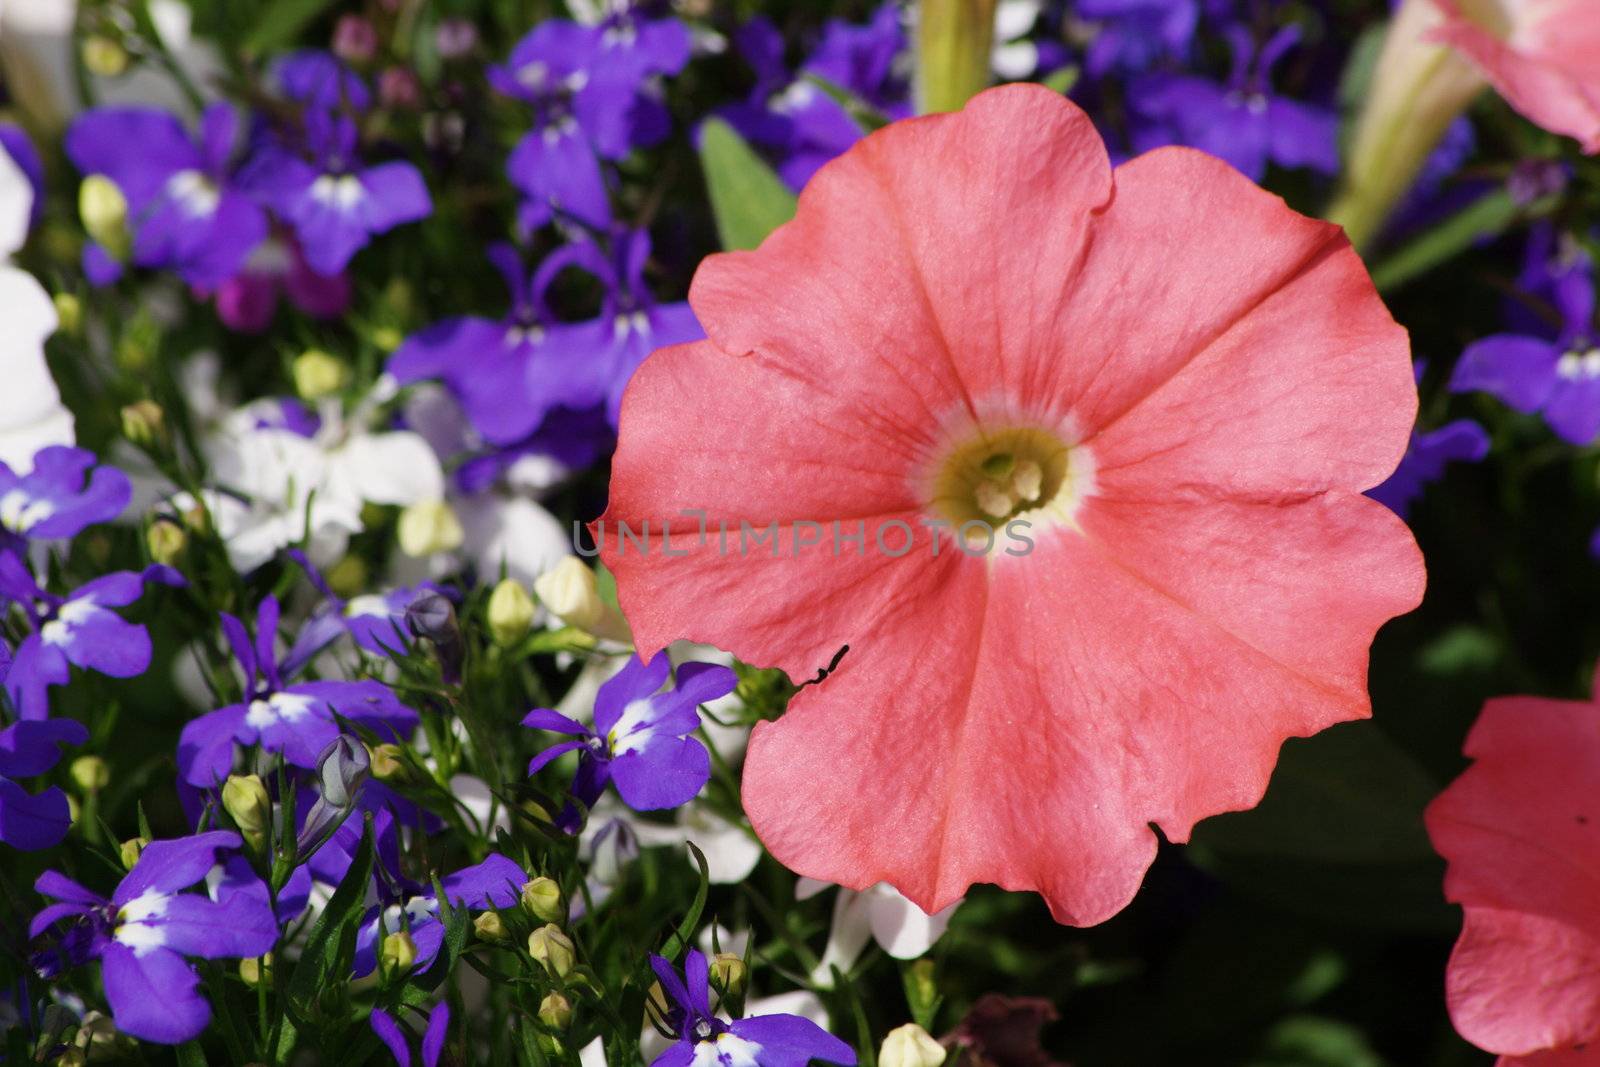 pink petunia flower growing on the plant against a background of blue and white lobelia